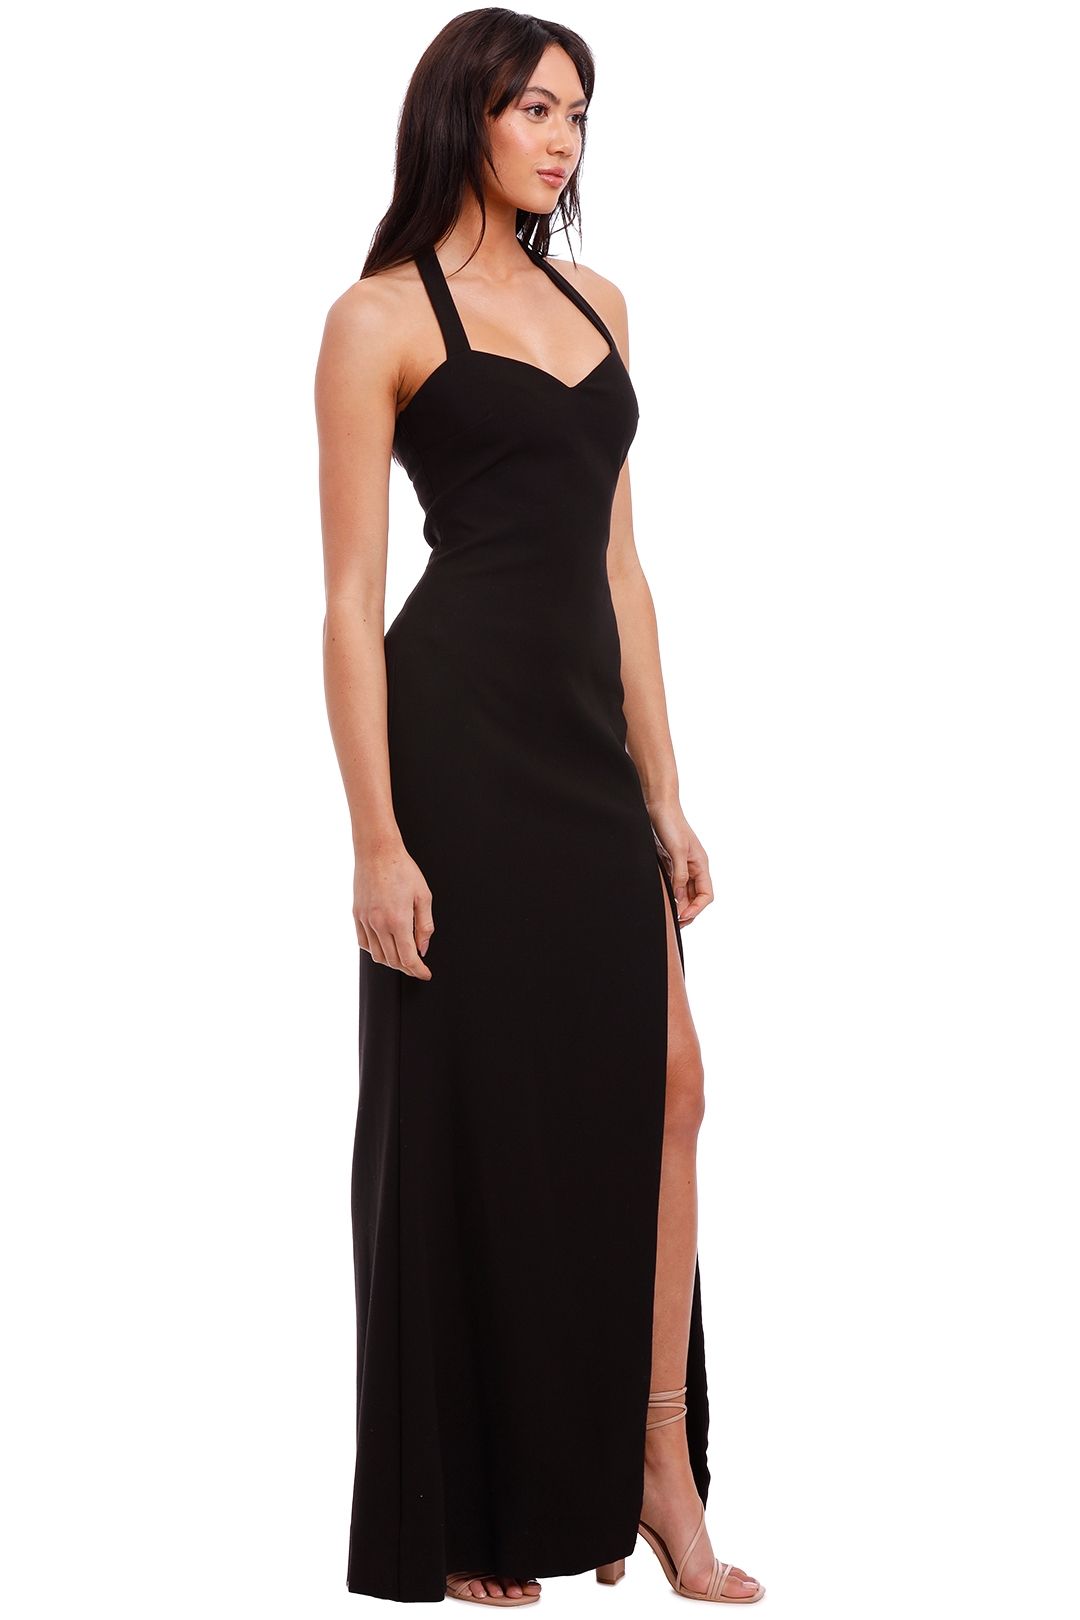 Likely NYC Claire Gown Black